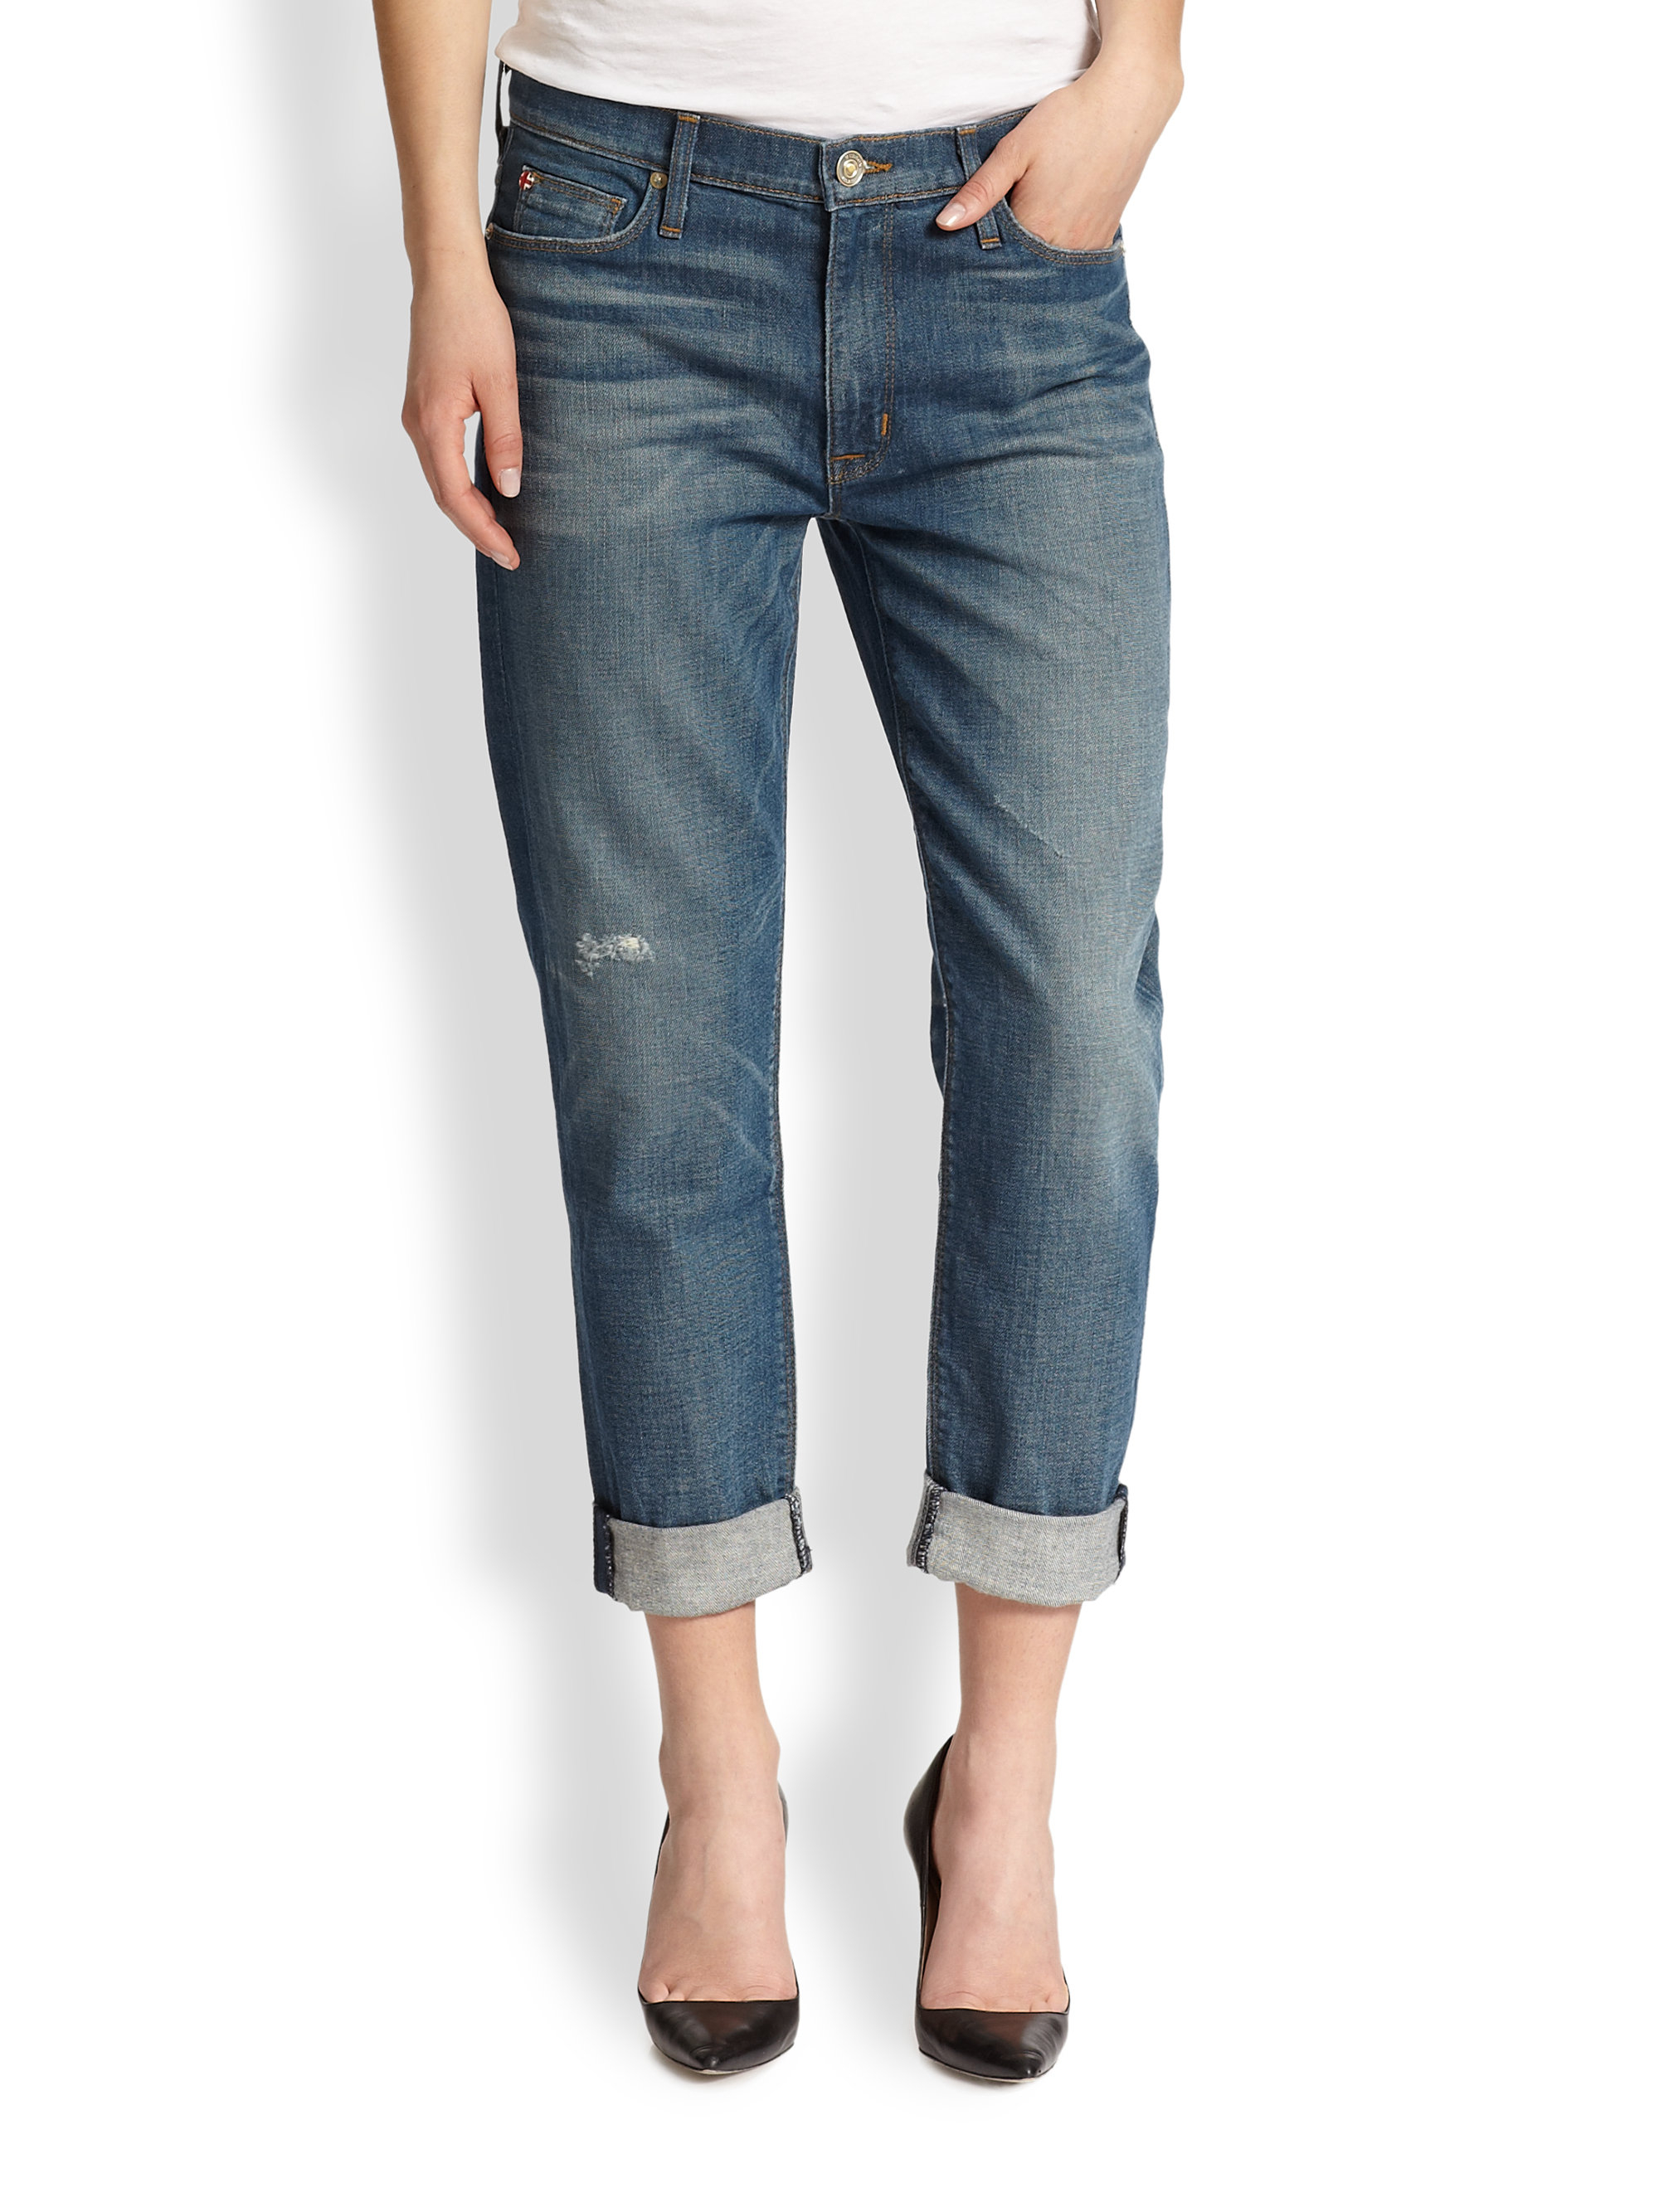 Hudson Jeans Jude Slouchy Skinny Cropped Jeans in Blue - Lyst